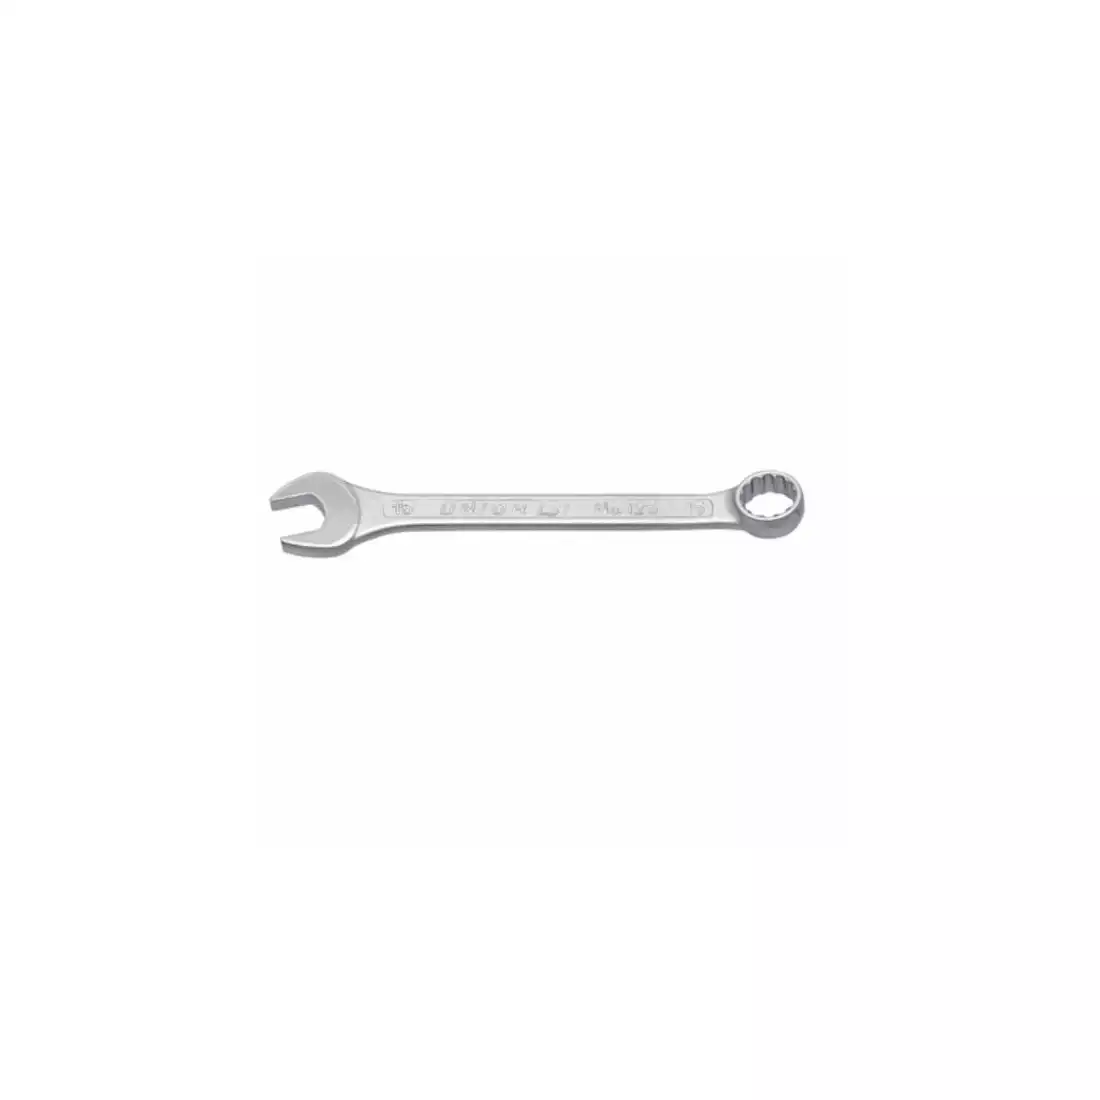 UNIOR combination wrench, short type 11 mm